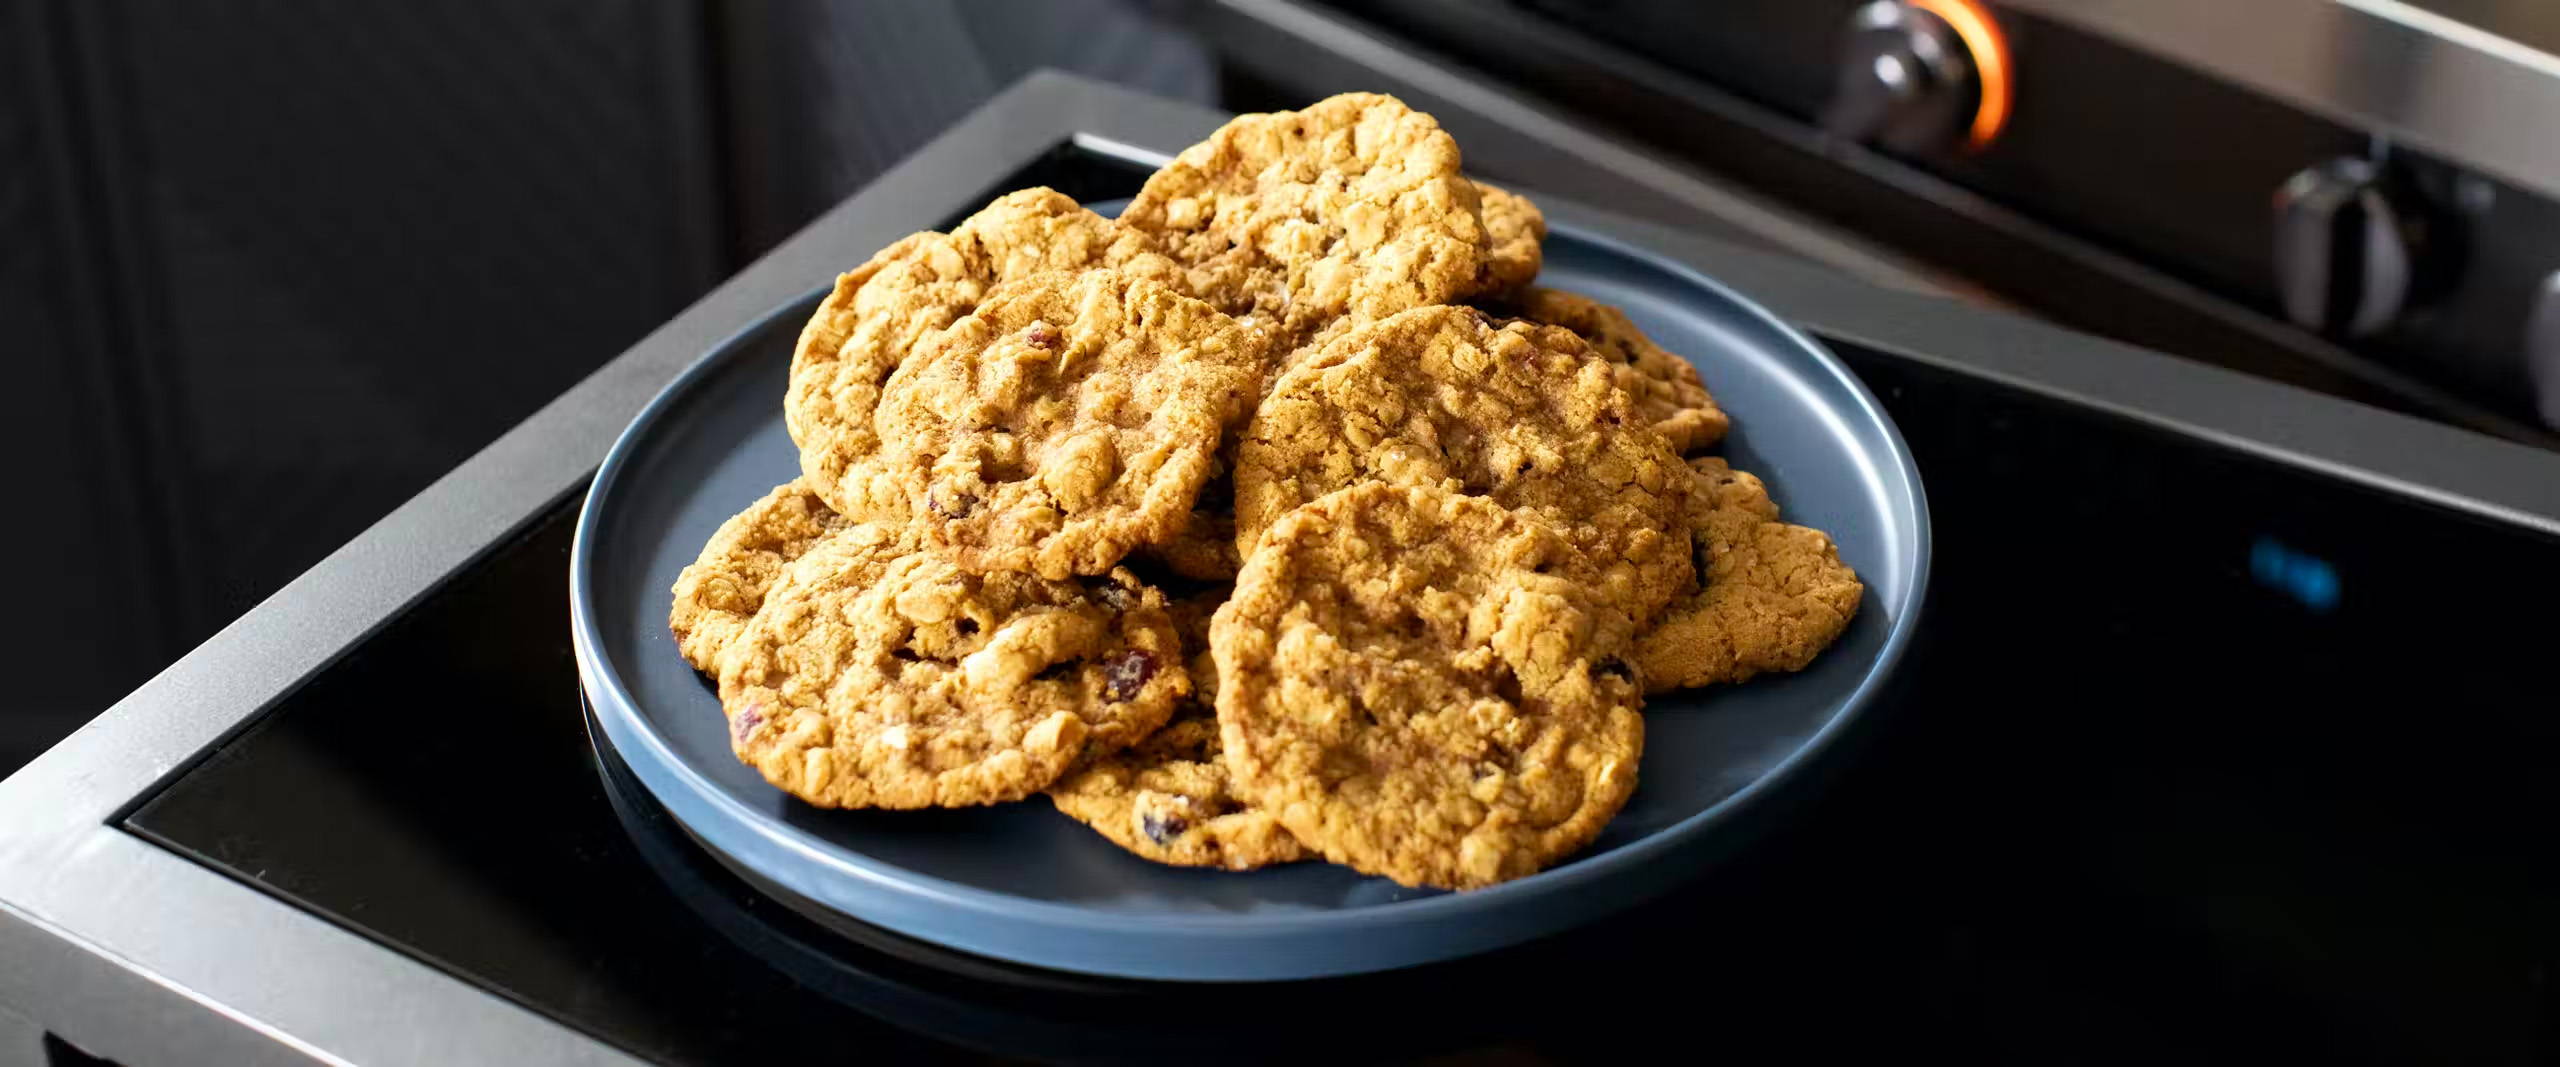 Plate of Oatmeal Cranberry Walnut Cookies